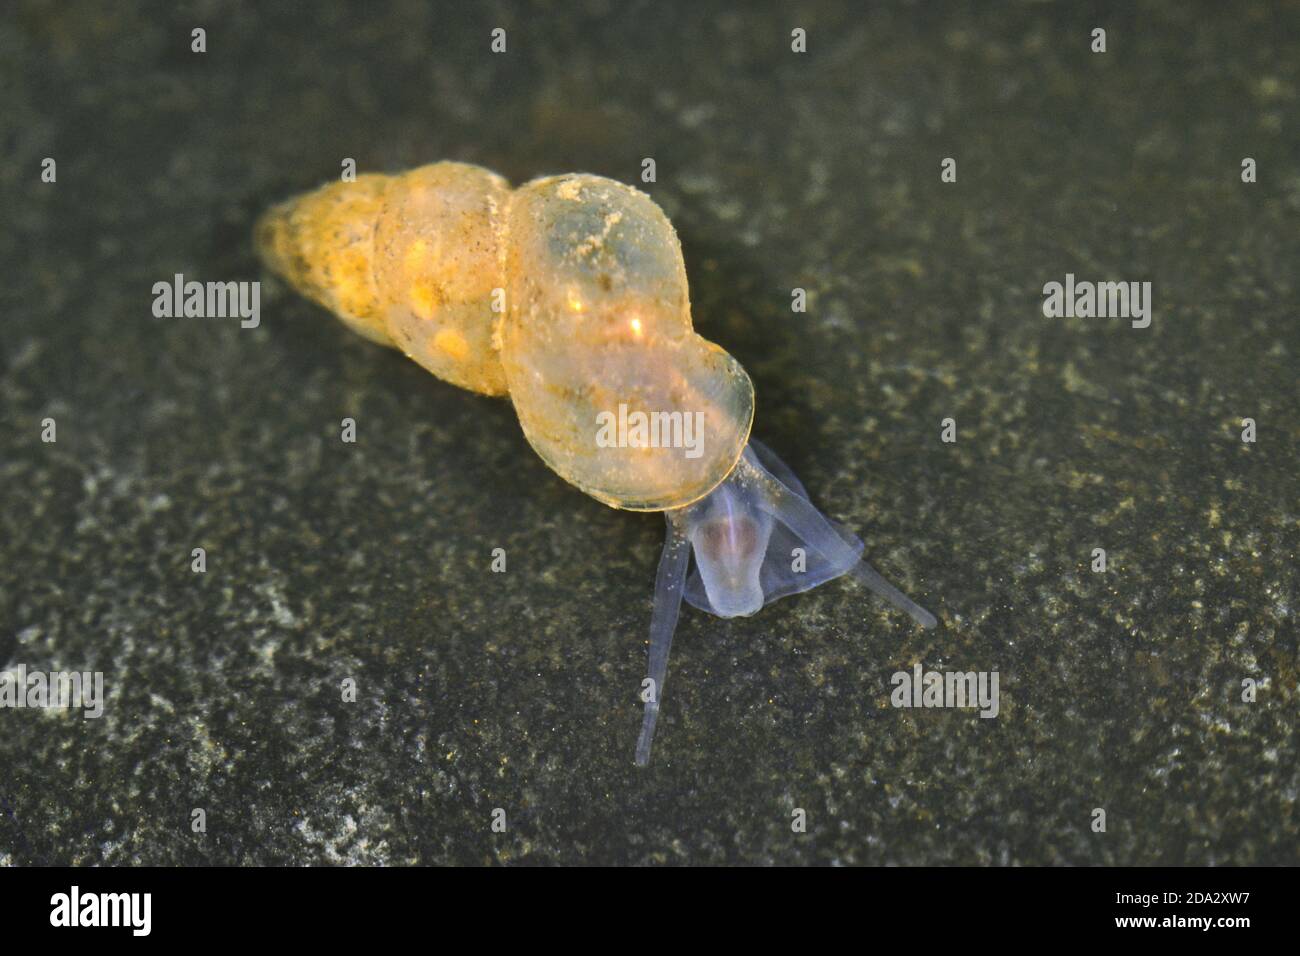 Freshwater snail (Bythiospeum quenstedti), on a stone, Germany Stock Photo